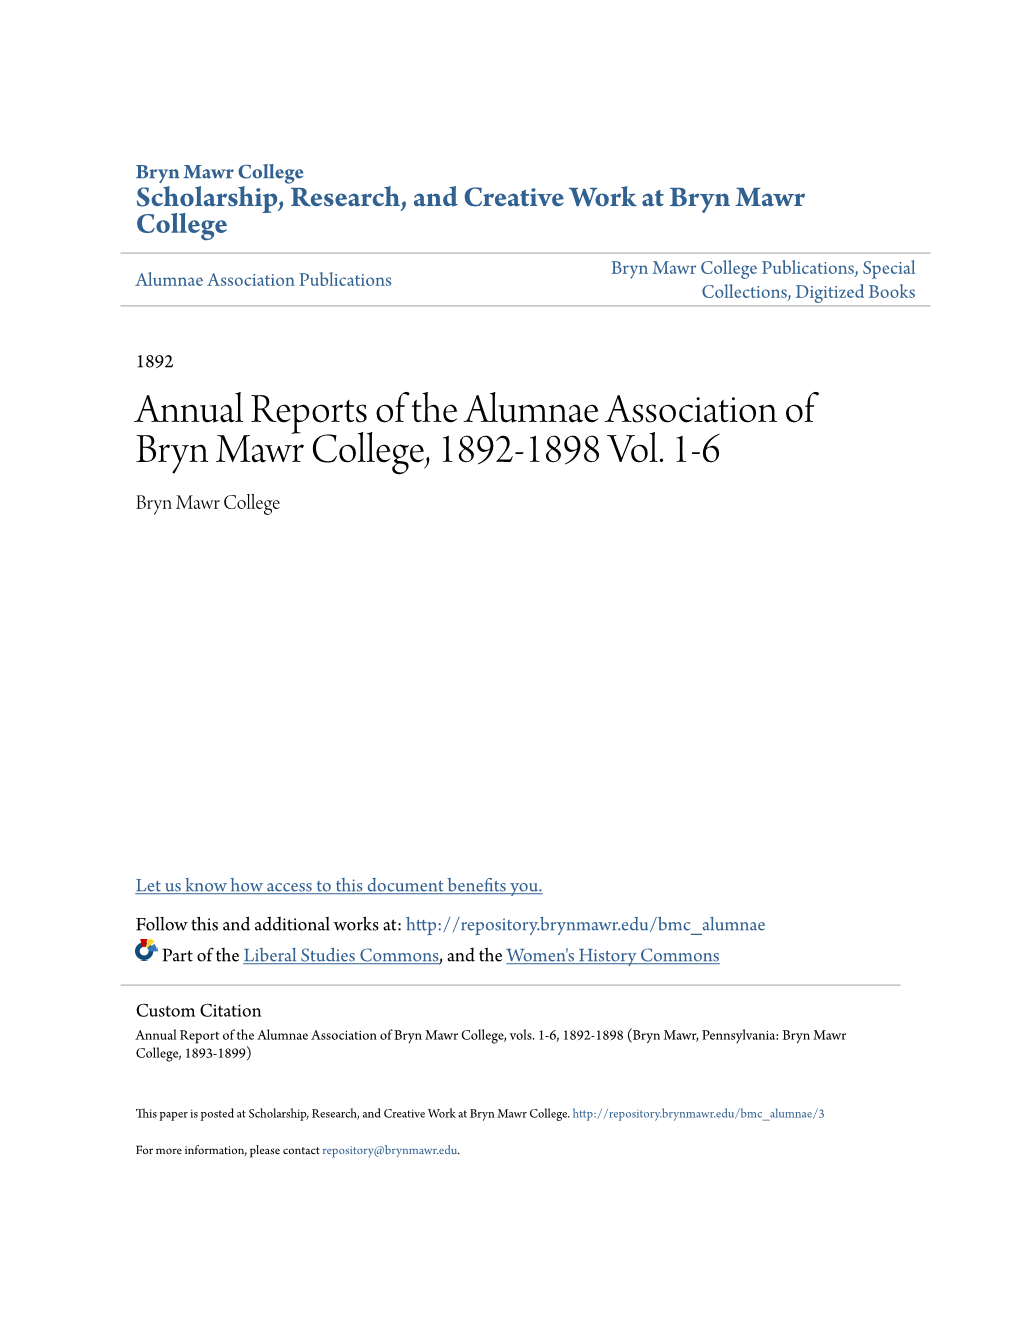 Annual Reports of the Alumnae Association of Bryn Mawr College, 1892-1898 Vol